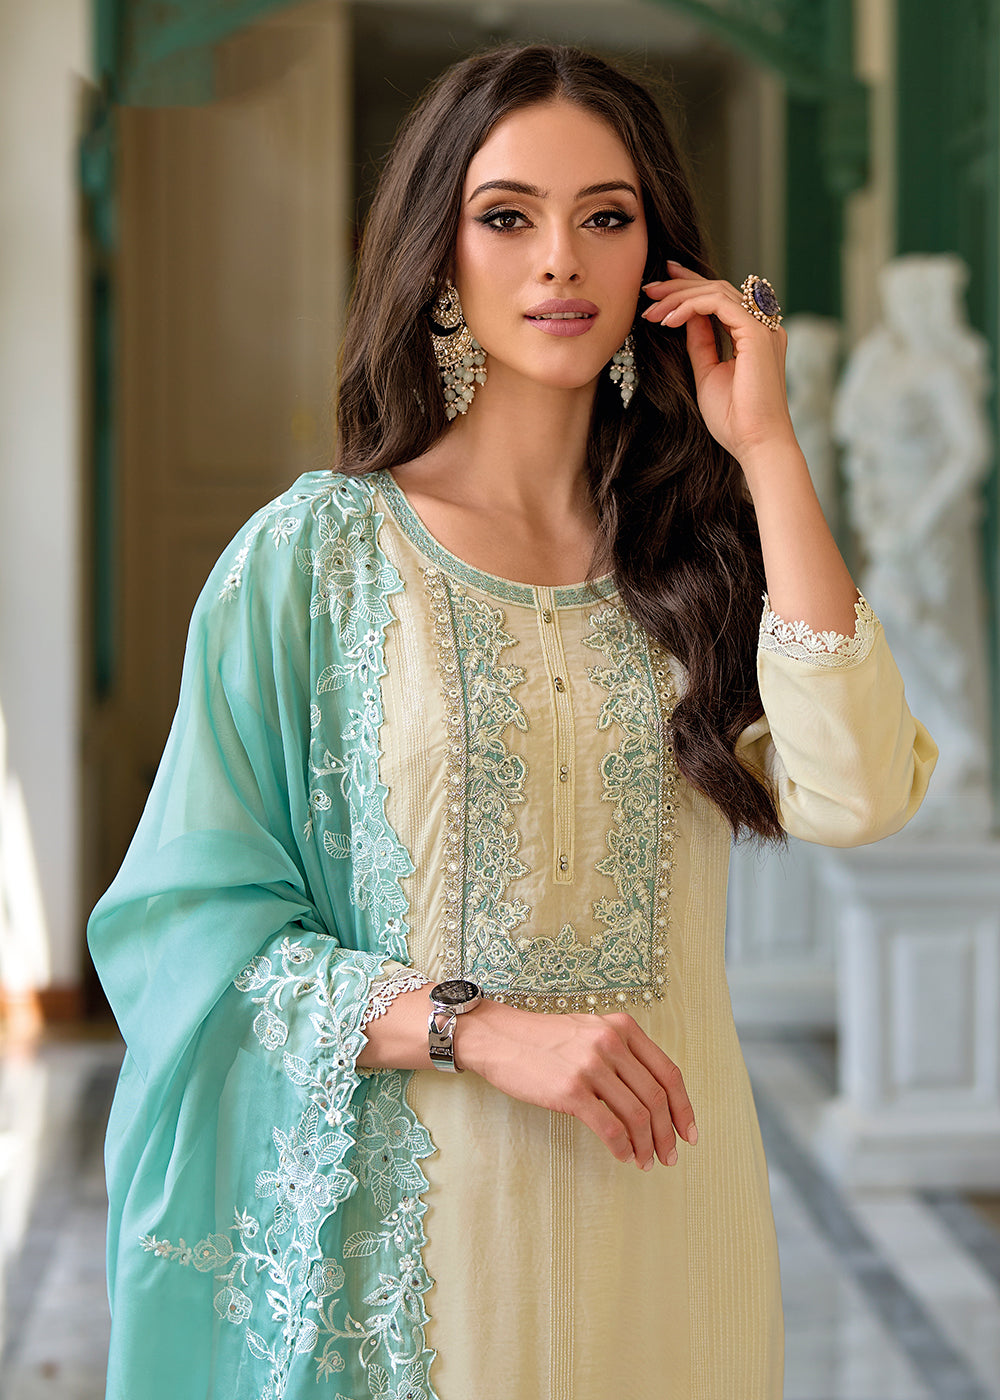 Buy Now Festive Organza Cream Embroidered Salwar Kameez Online in USA, UK, Canada, Germany, Australia & Worldwide at Empress Clothing.